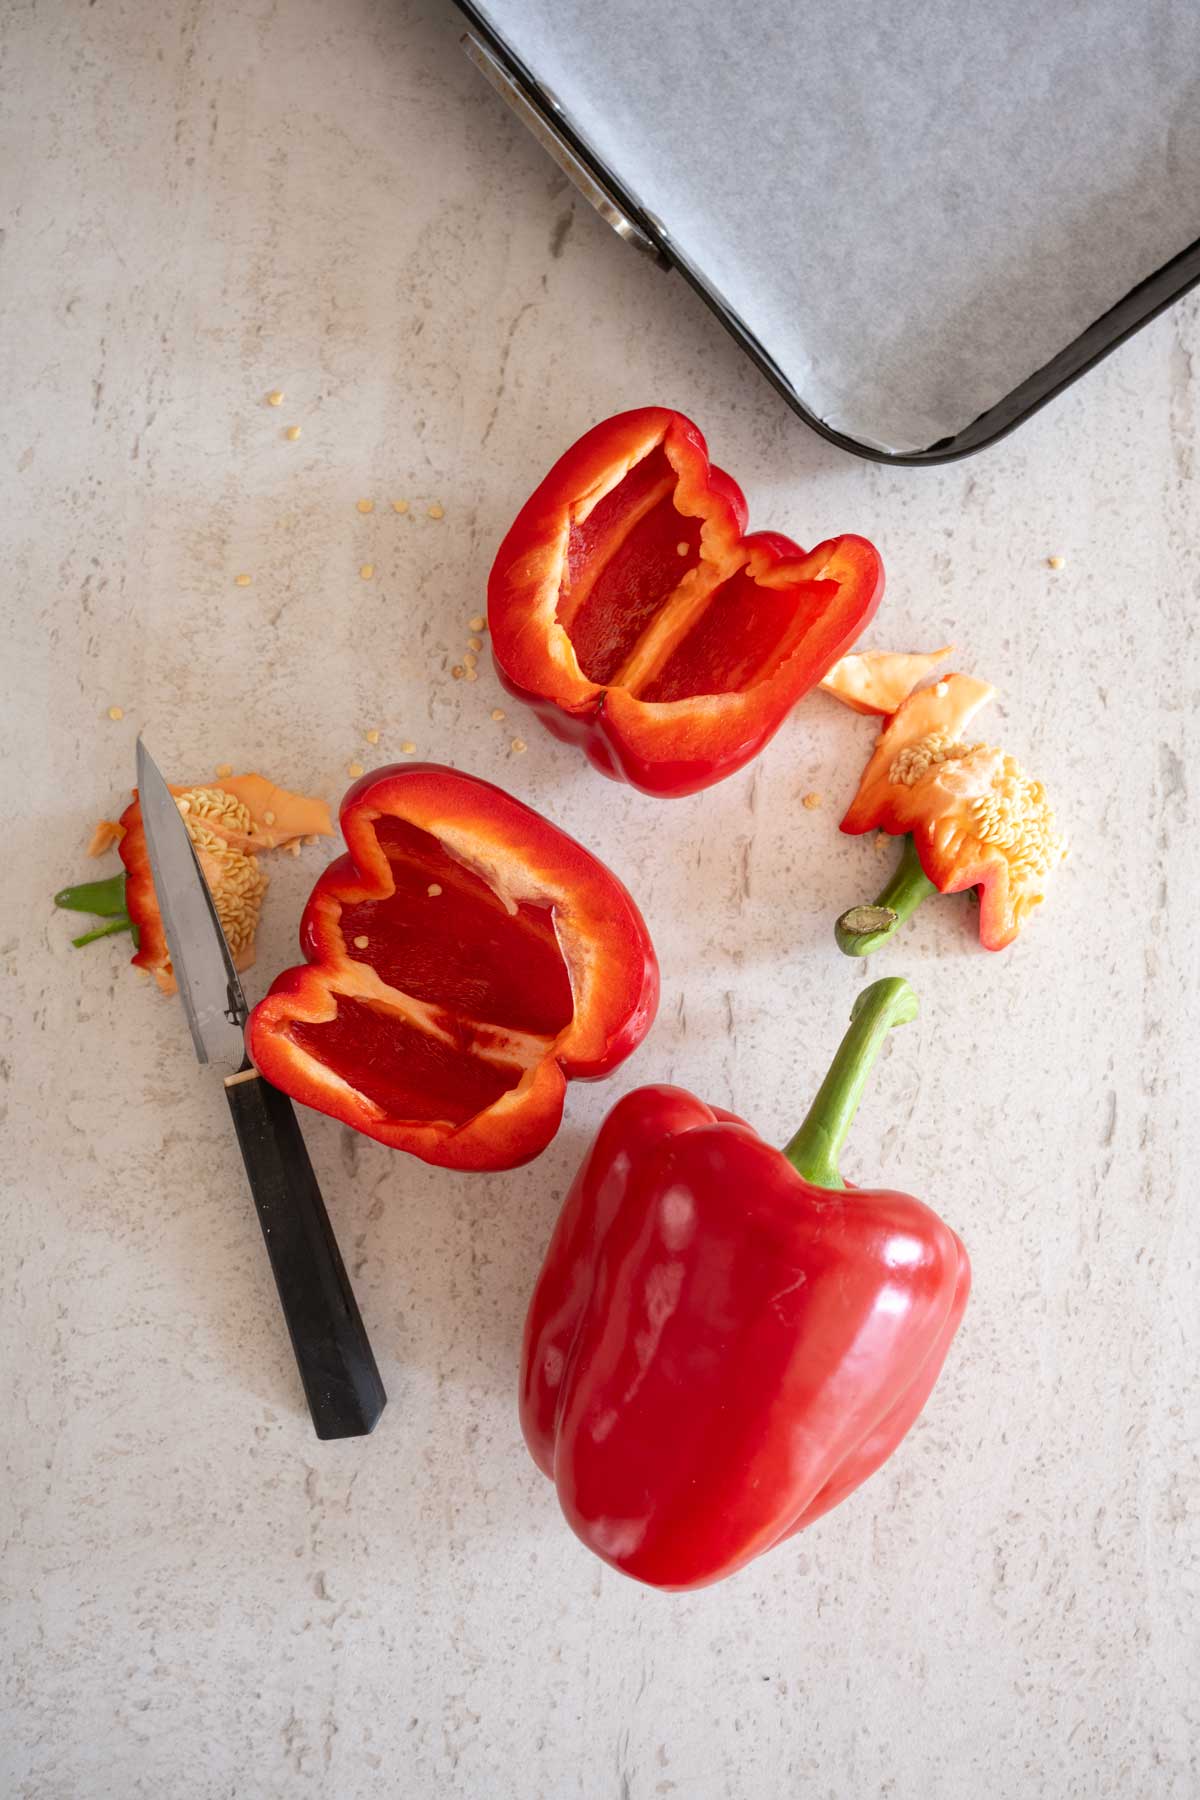 Red bell pepper cut in half with seeds on a kitchen counter alongside a knife.